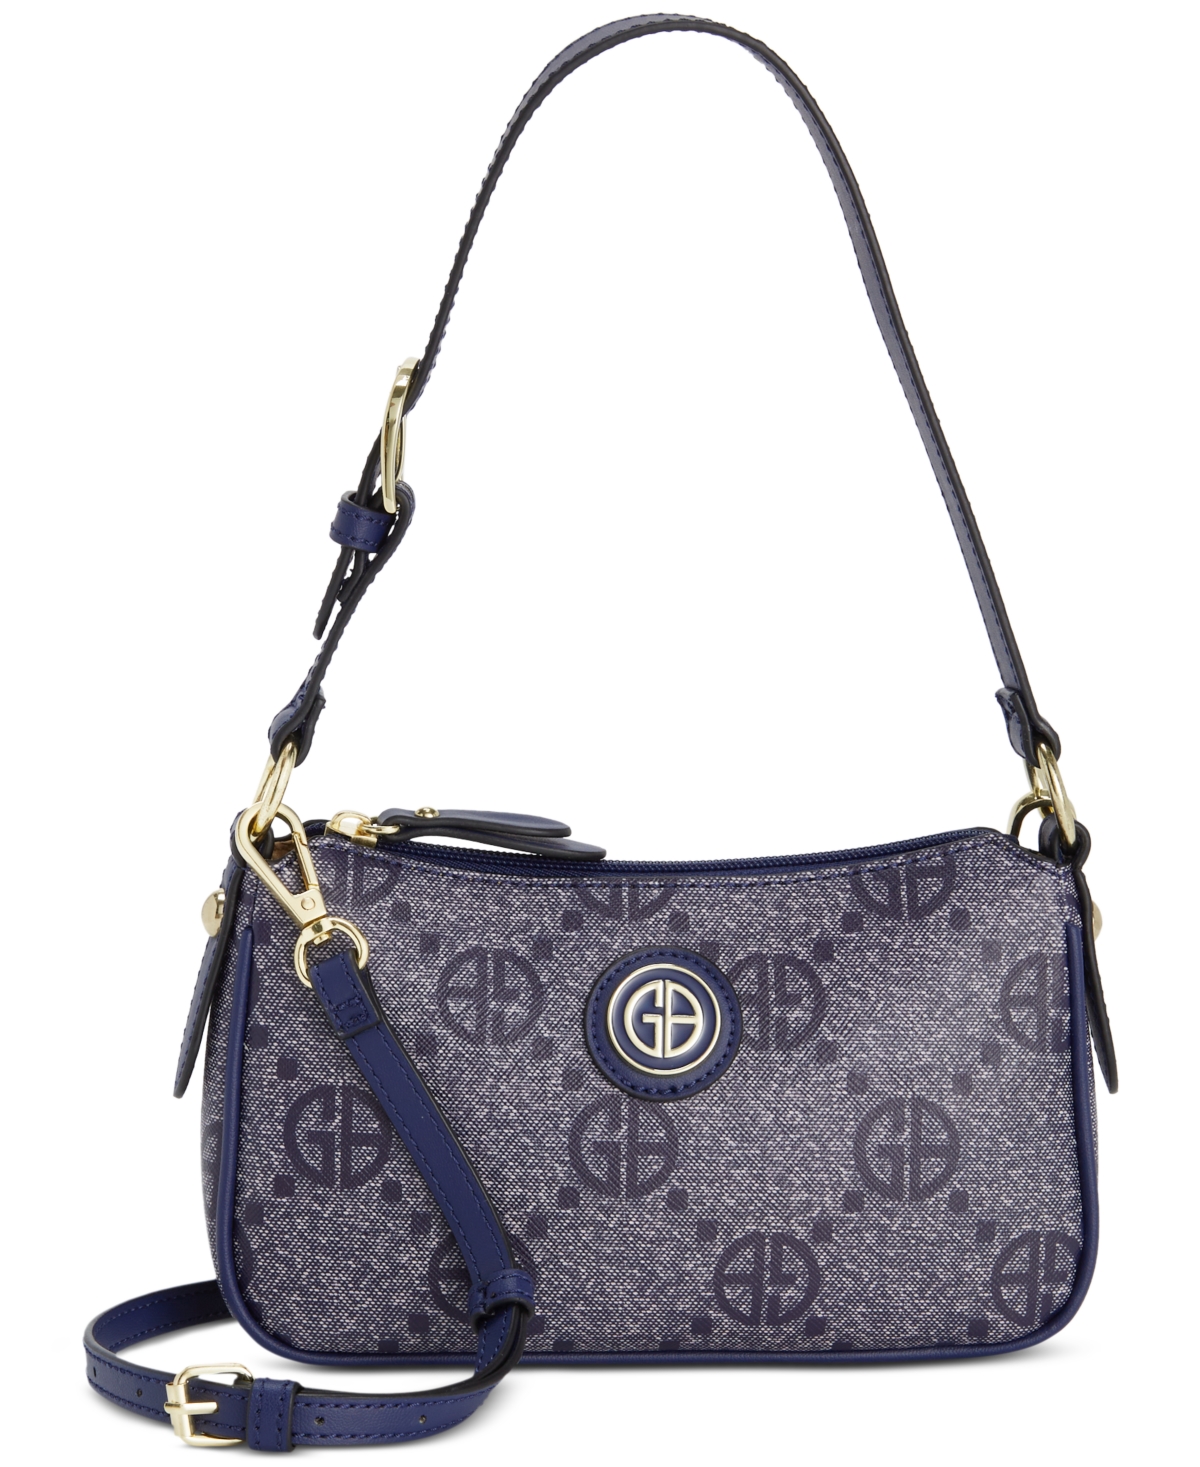 Monogram Signature Small Baguette Bag, Created for Macy's - Navy/white